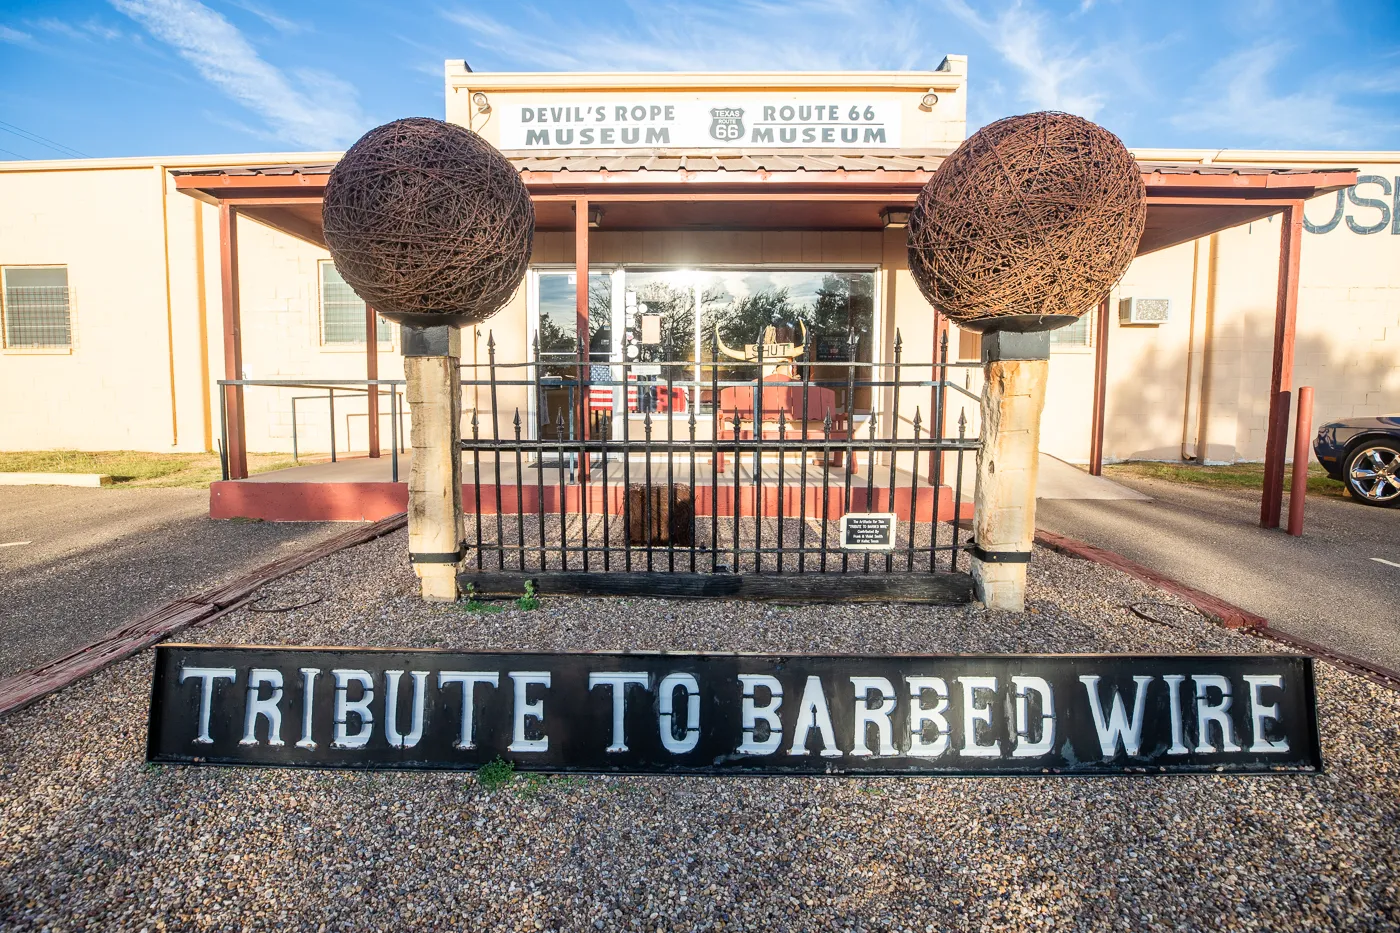 Devil's Rope Museum: Barbed Wire Museum in McLean, Texas on Route 66